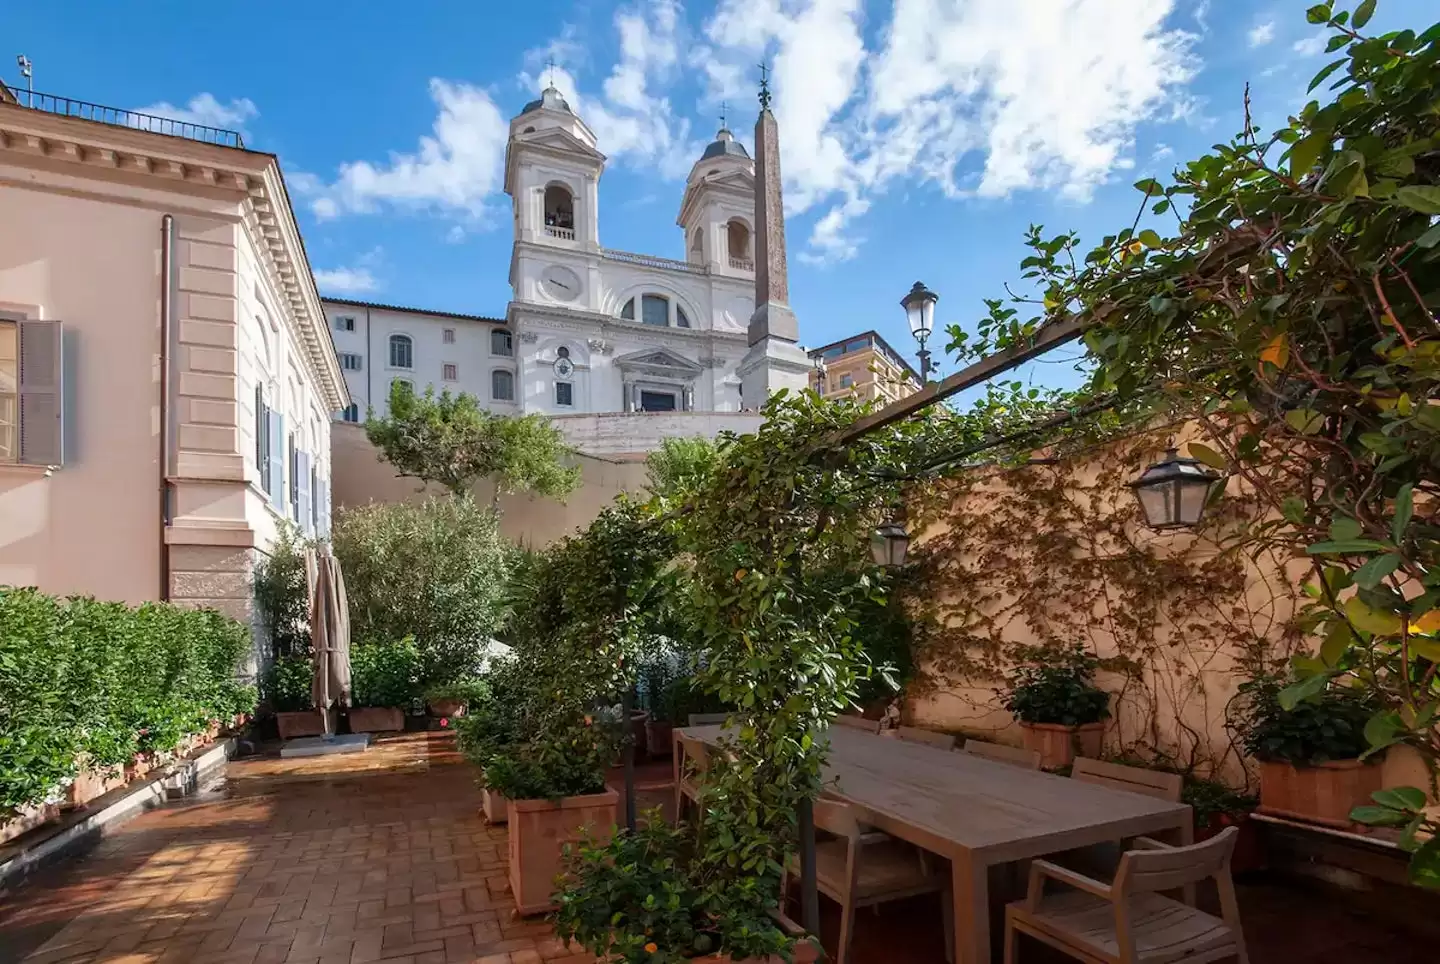 Best Hotels in Rome near Spanish Steps - Courtyard in Mirtillo apartment